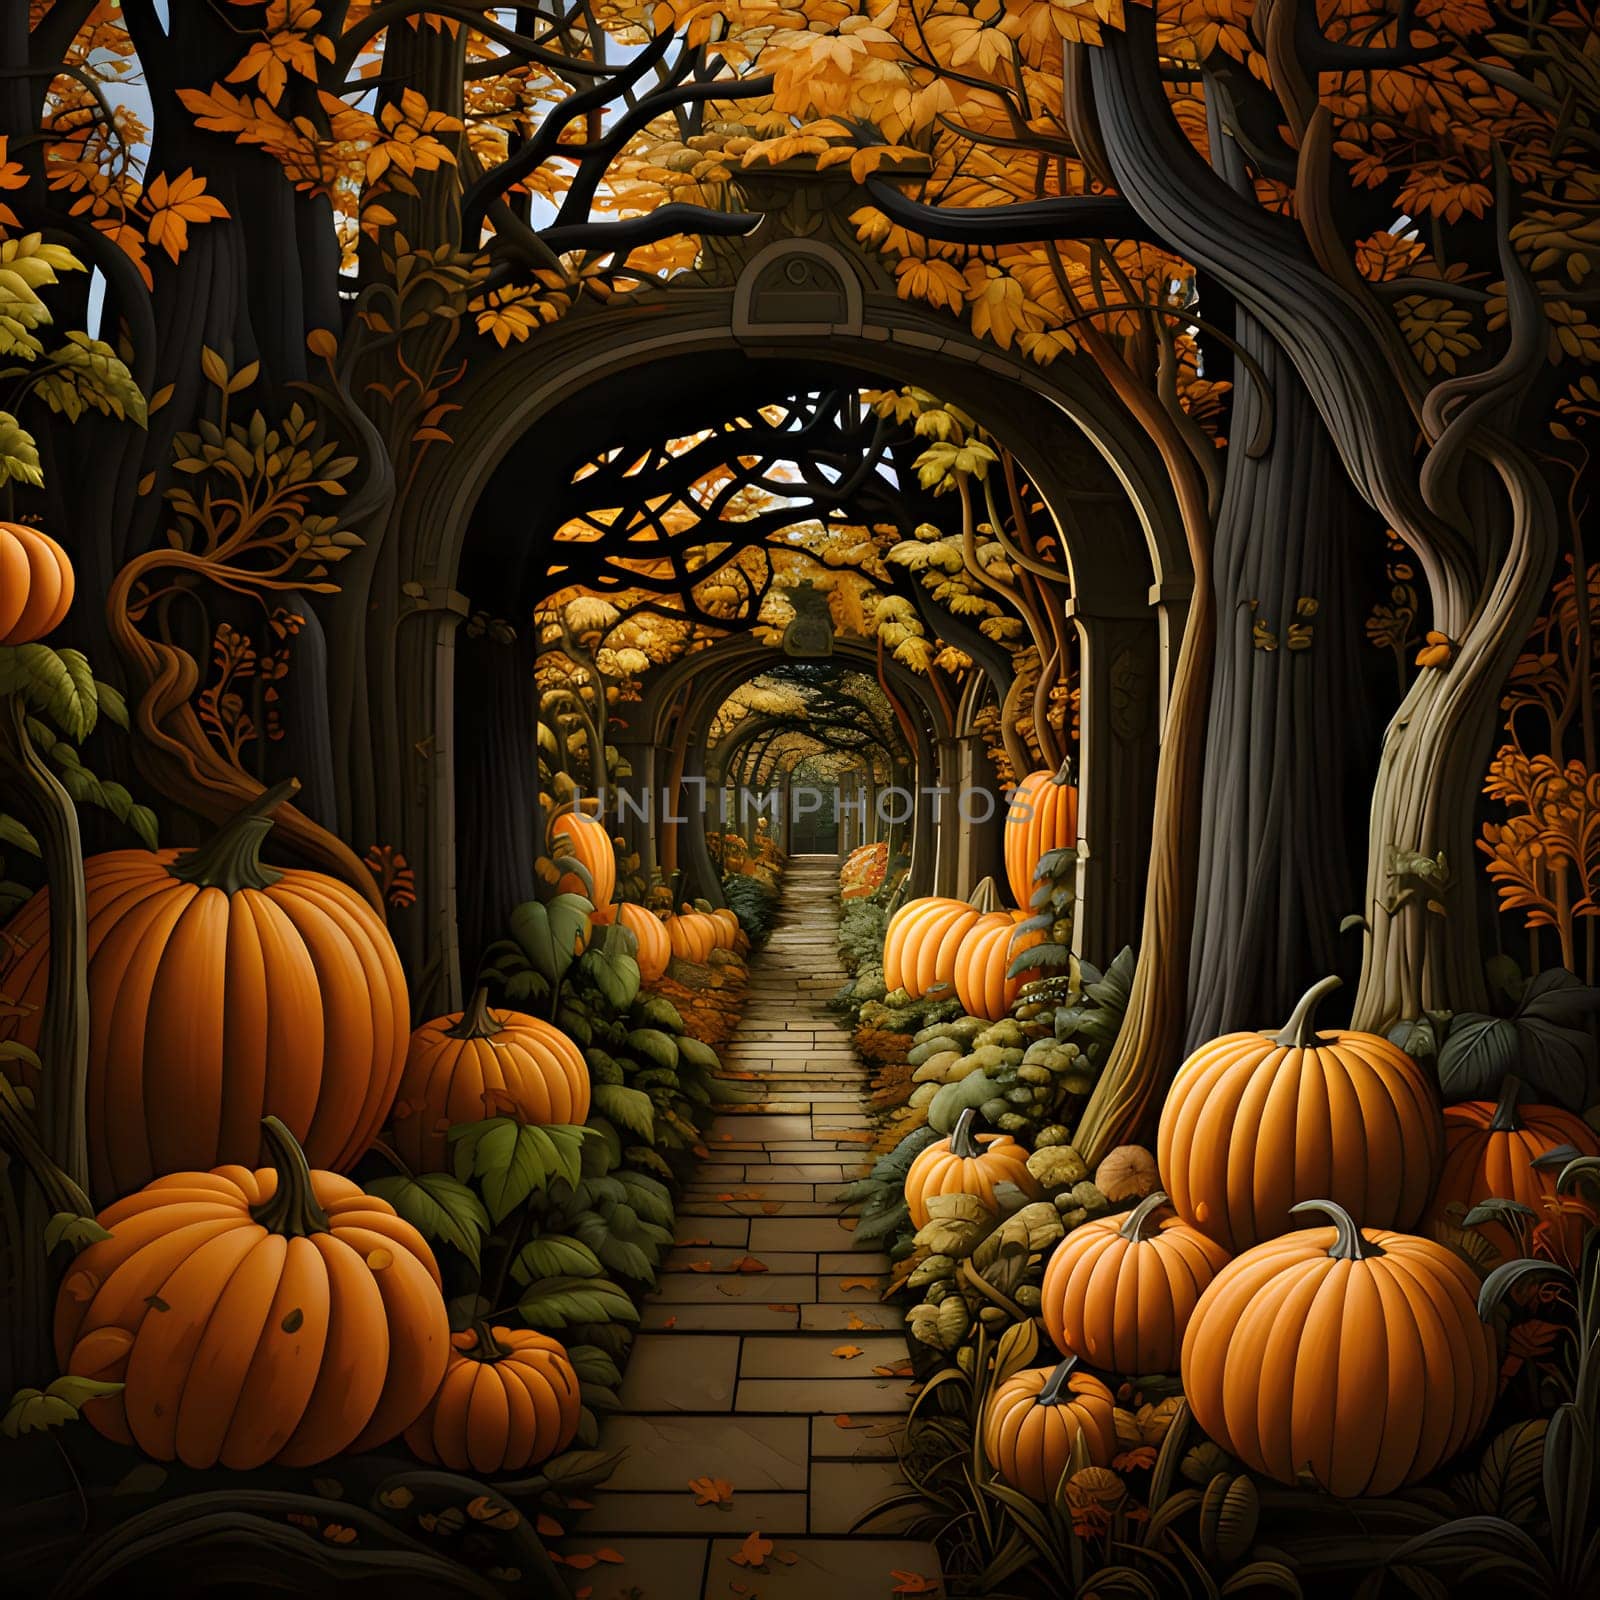 A small alley in the garden all around pumpkins vines trees leaves. Pumpkin as a dish of thanksgiving for the harvest. by ThemesS